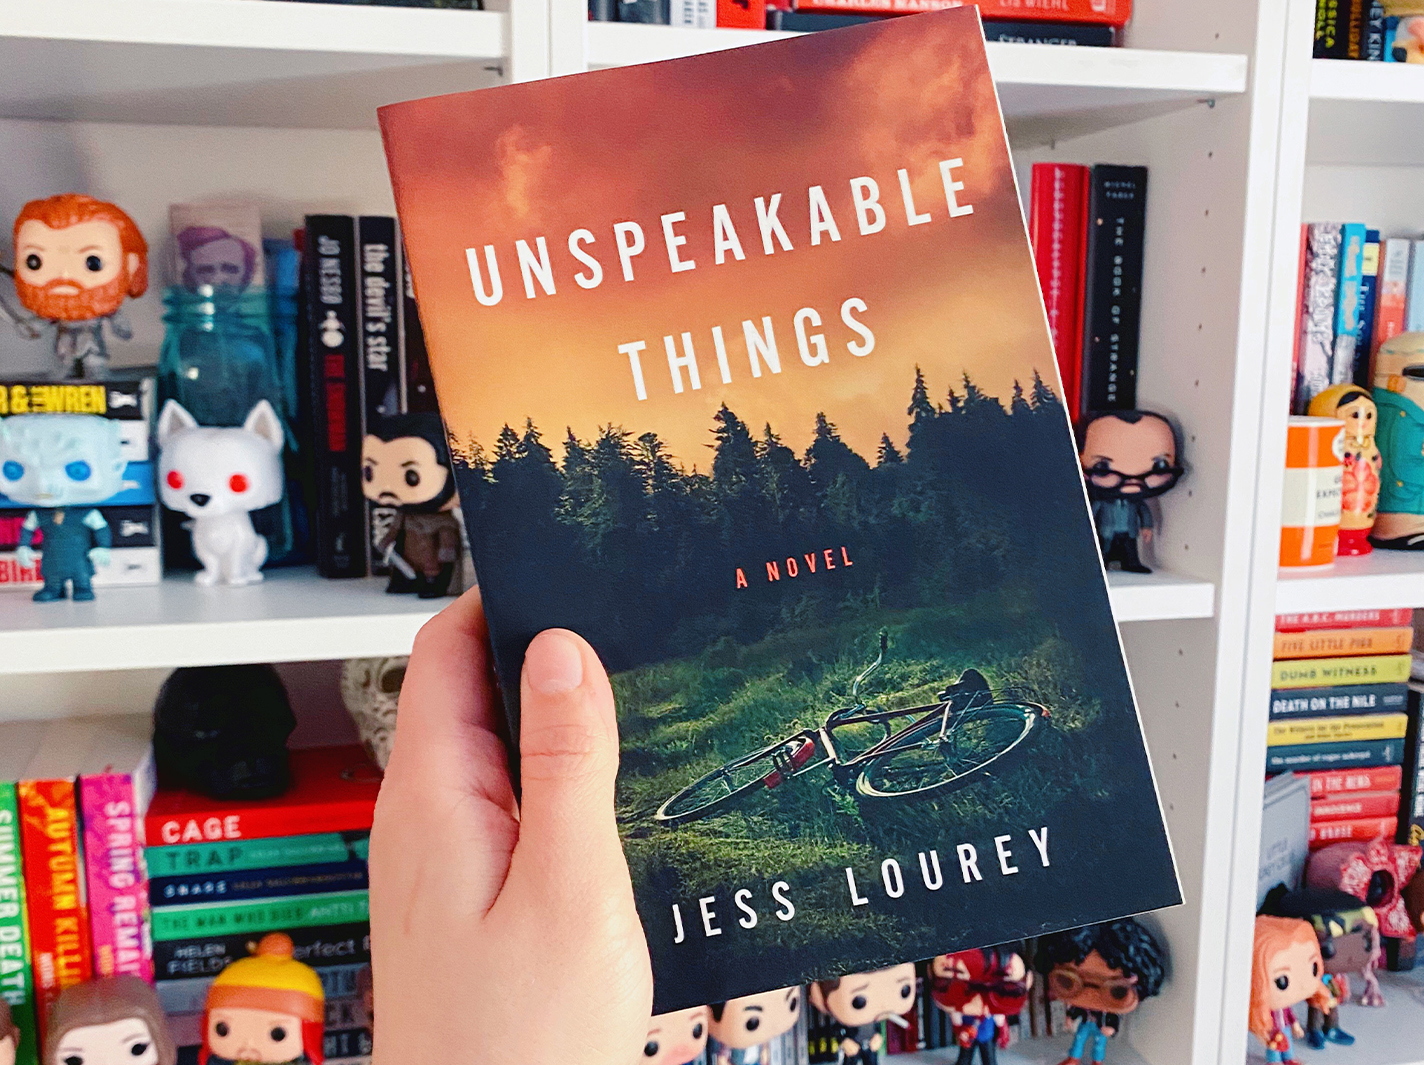 Book Review: “The Unspeakable Things” by Jess Lourey